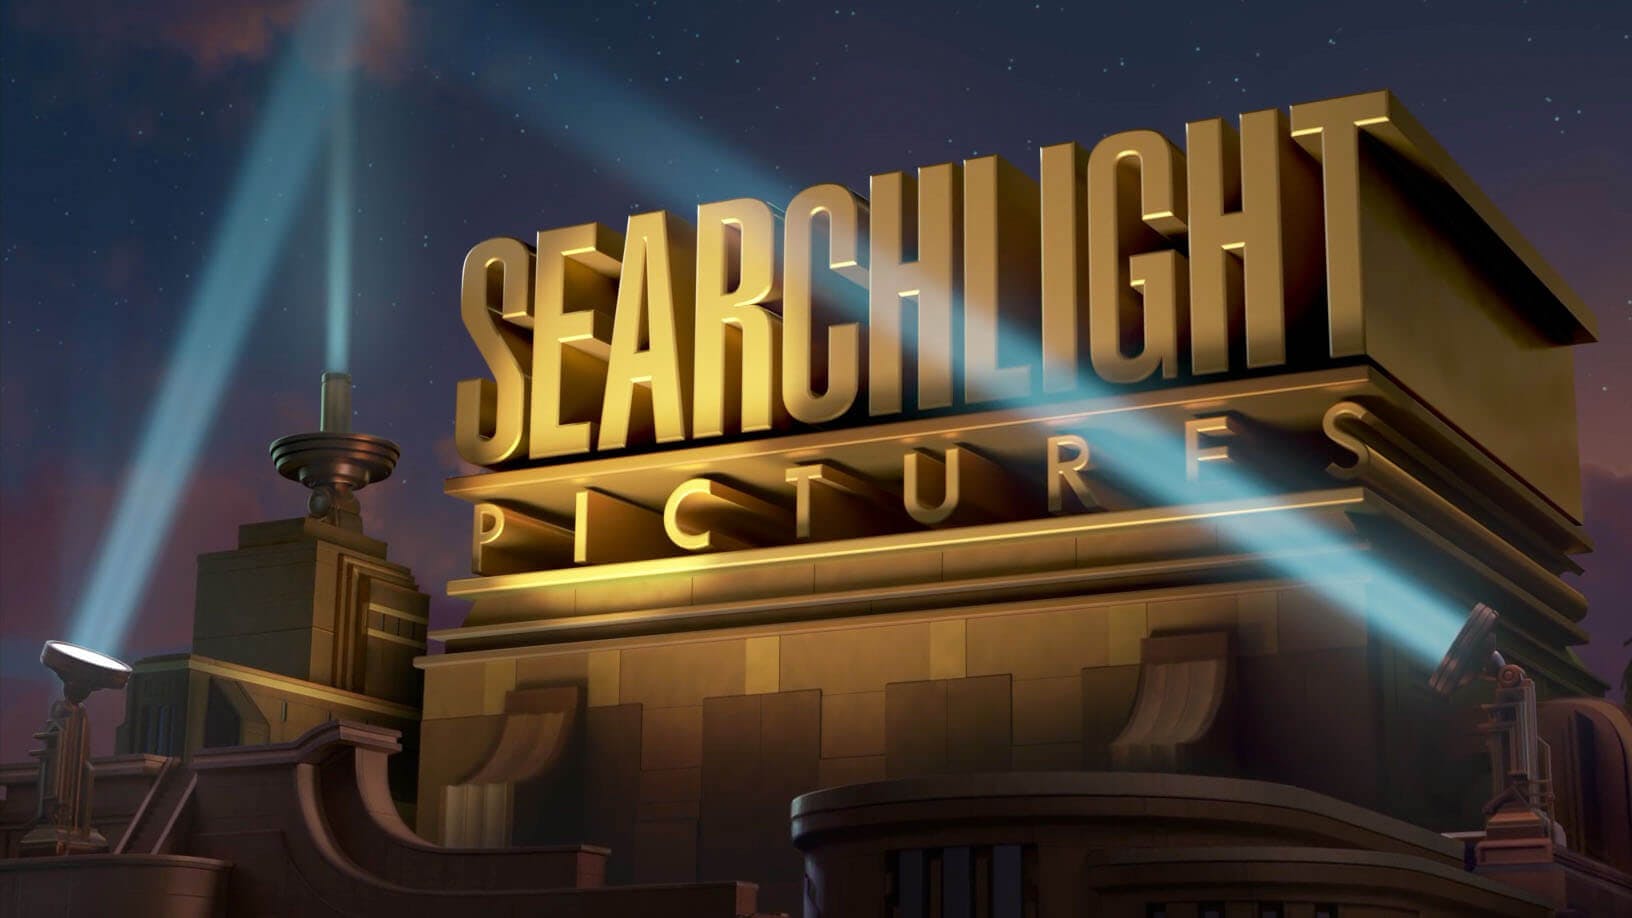 Searchlight Pictures hero photo